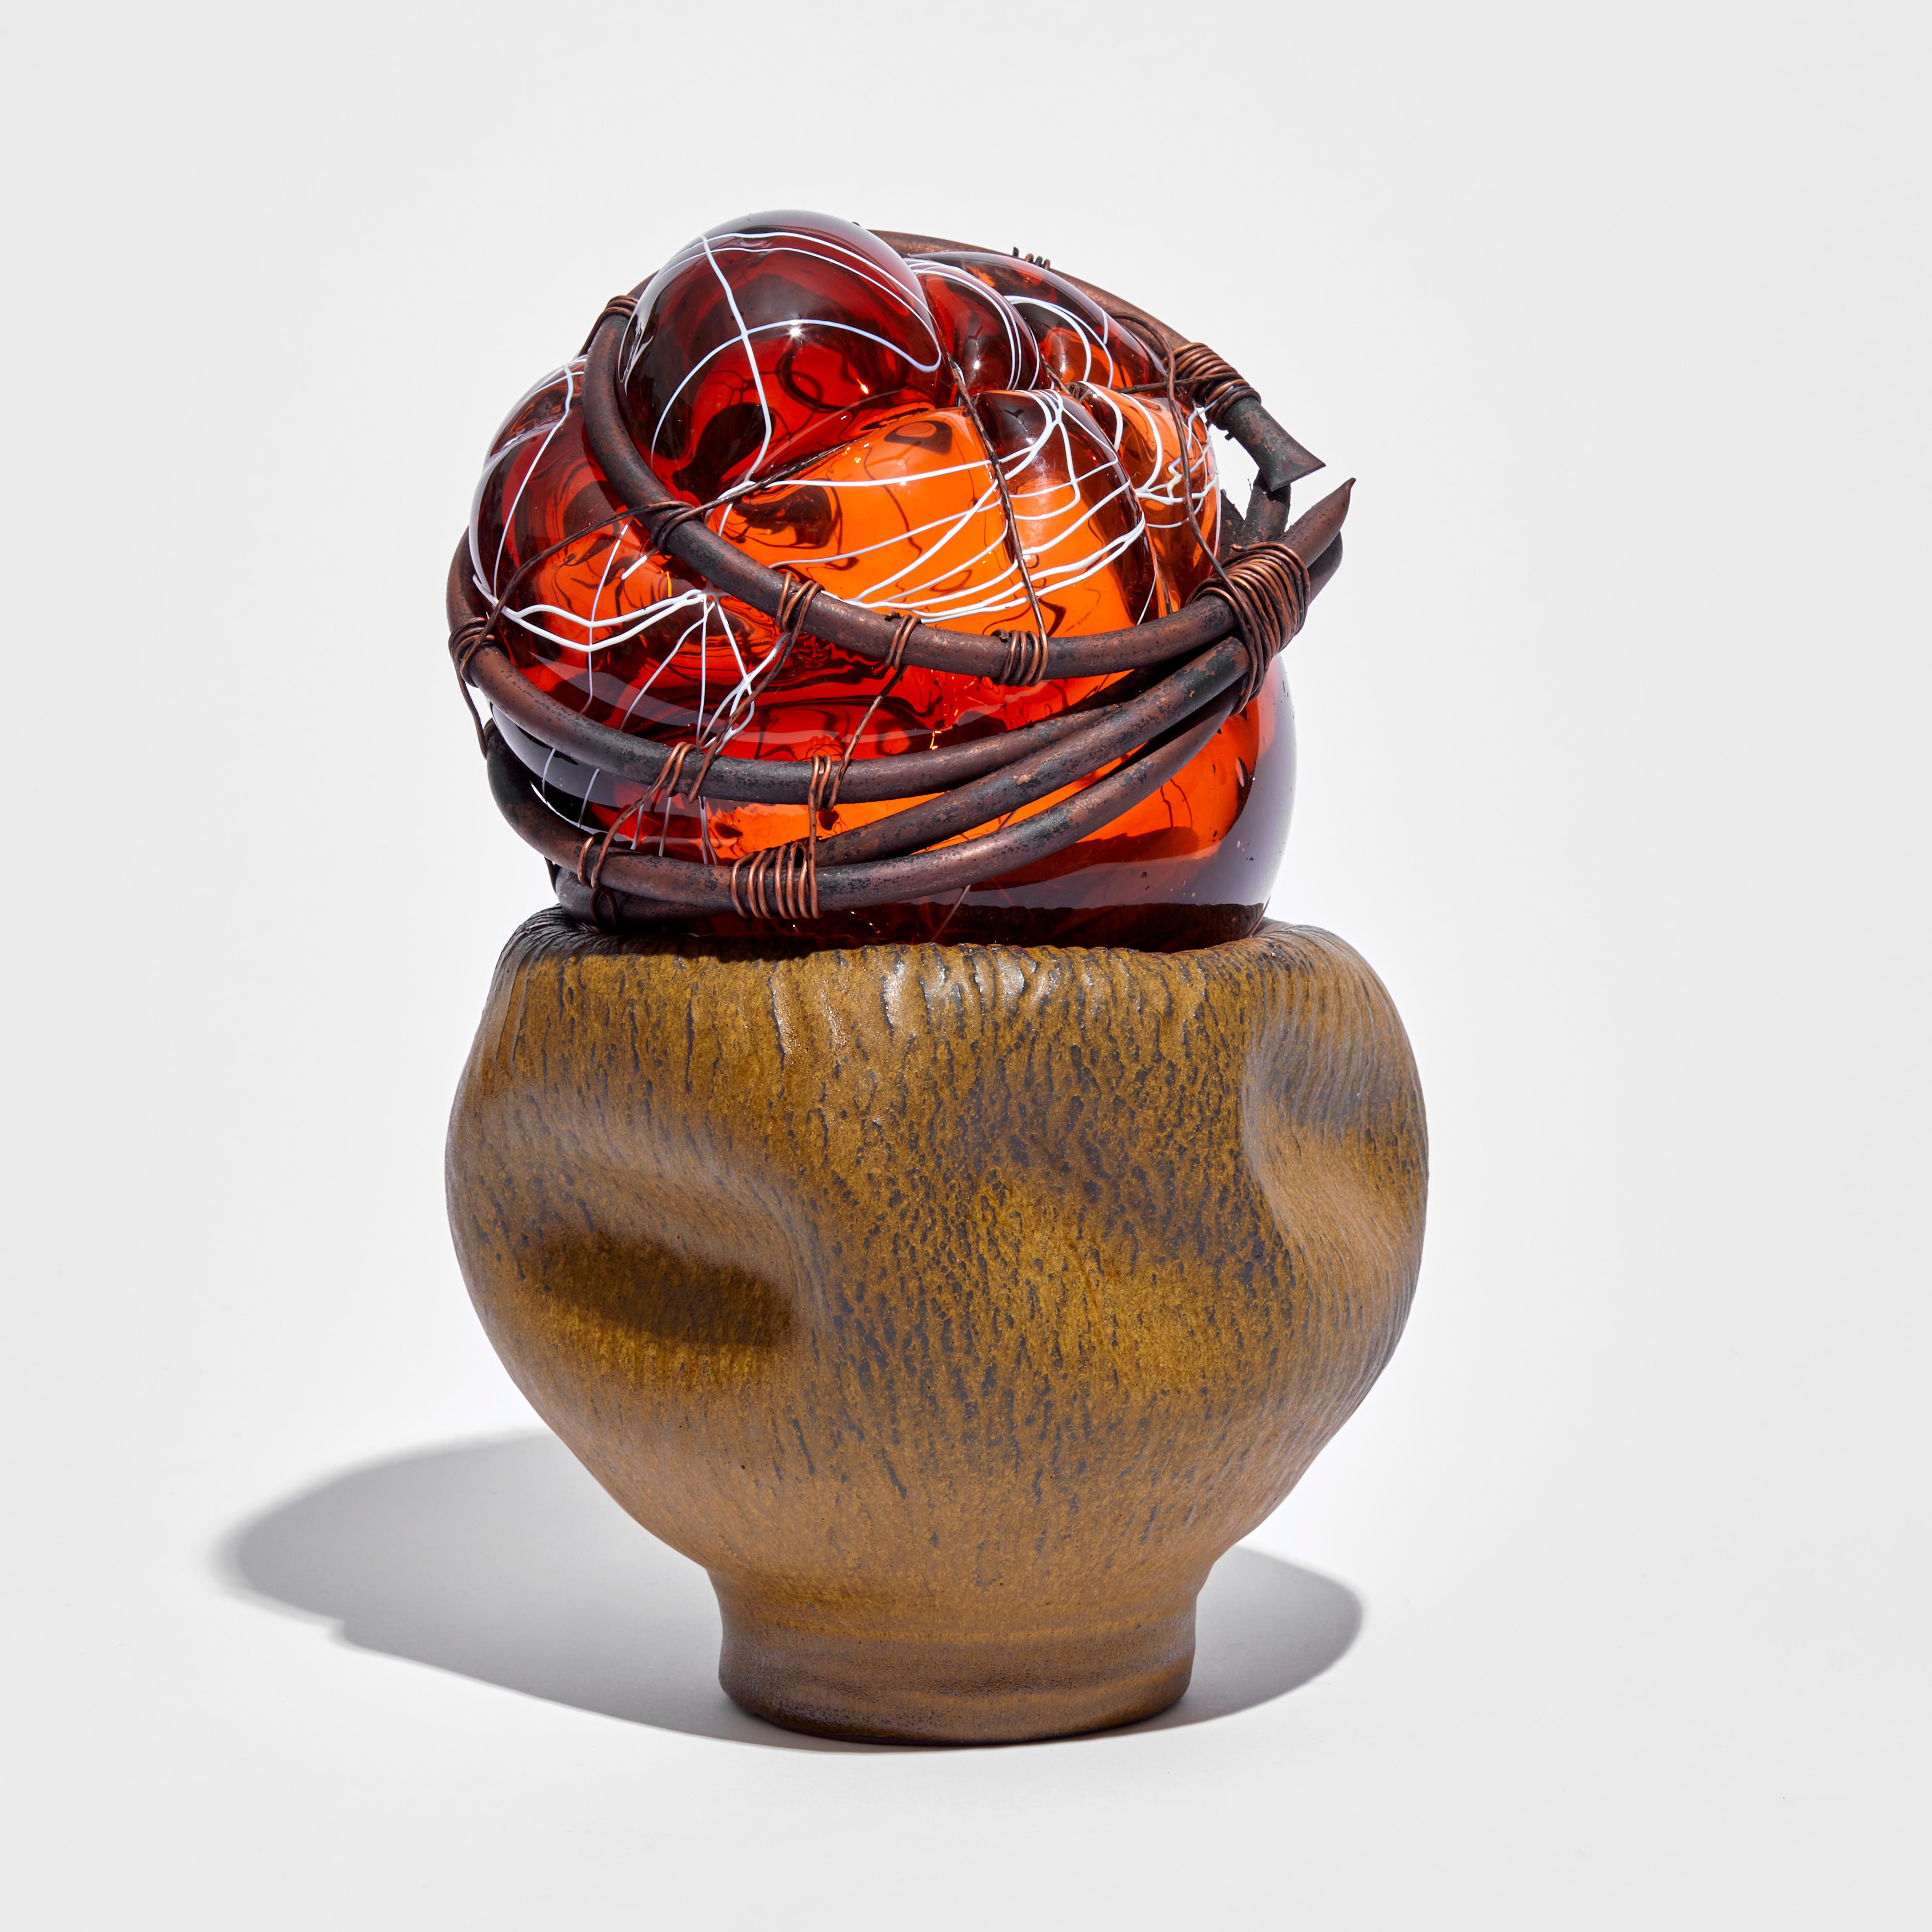 'Strange Fruit - The Congregation IV' is a unique sculpture by the British artist, Chris Day, created from handblown & sculpted glass with terracotta, micro bore copper pipe and copper wire.

This piece was created as a part of the artist's